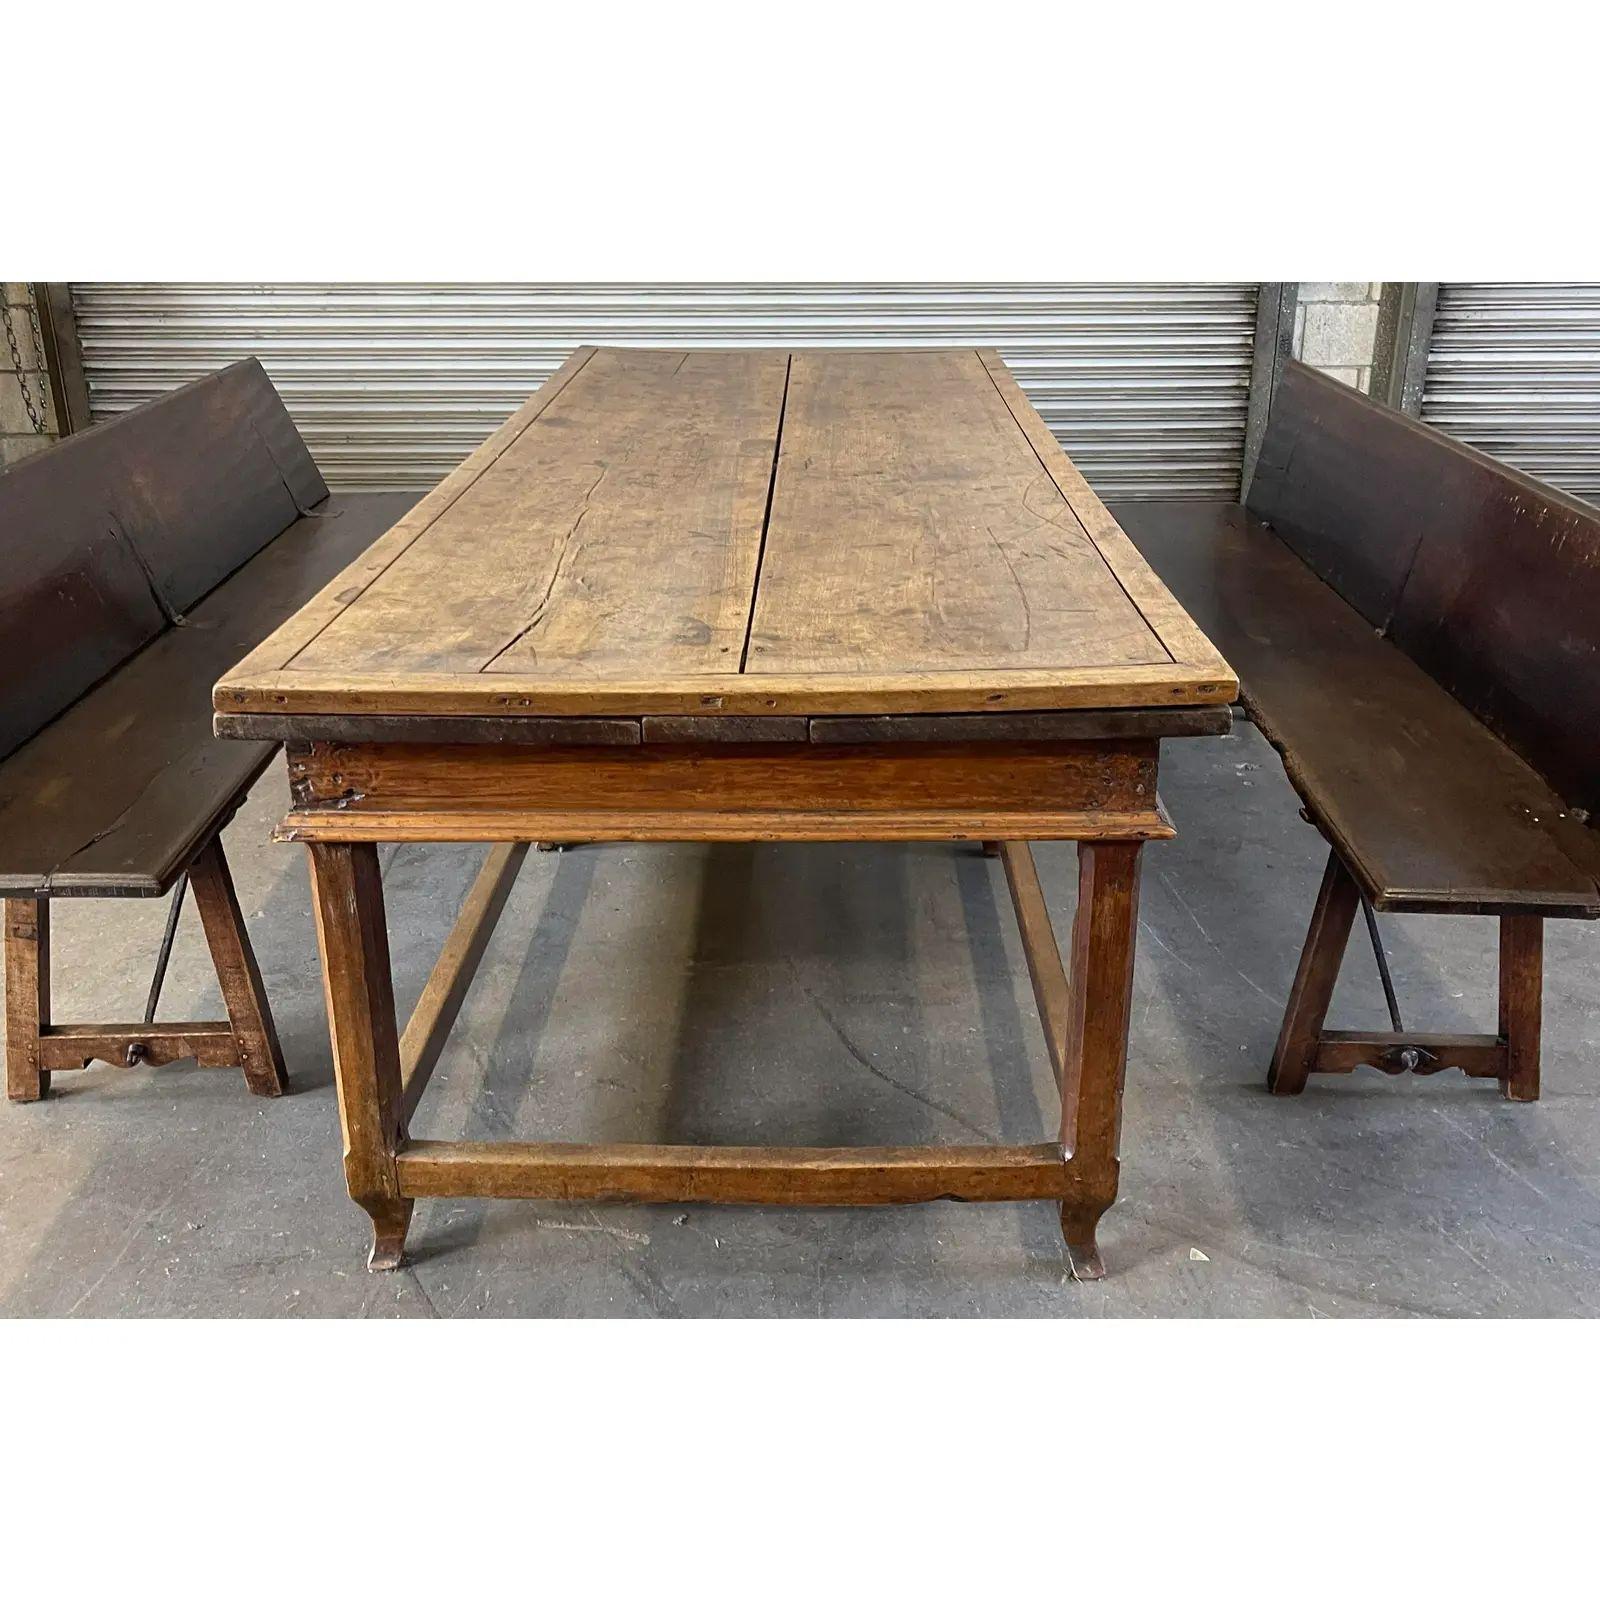 Antique 18th century French Country farmhouse extension table & bench seating. It features two hidden leaves that pullout on each long side as well as two metamorphic benches that have chair backs that fold up.

Additional information: